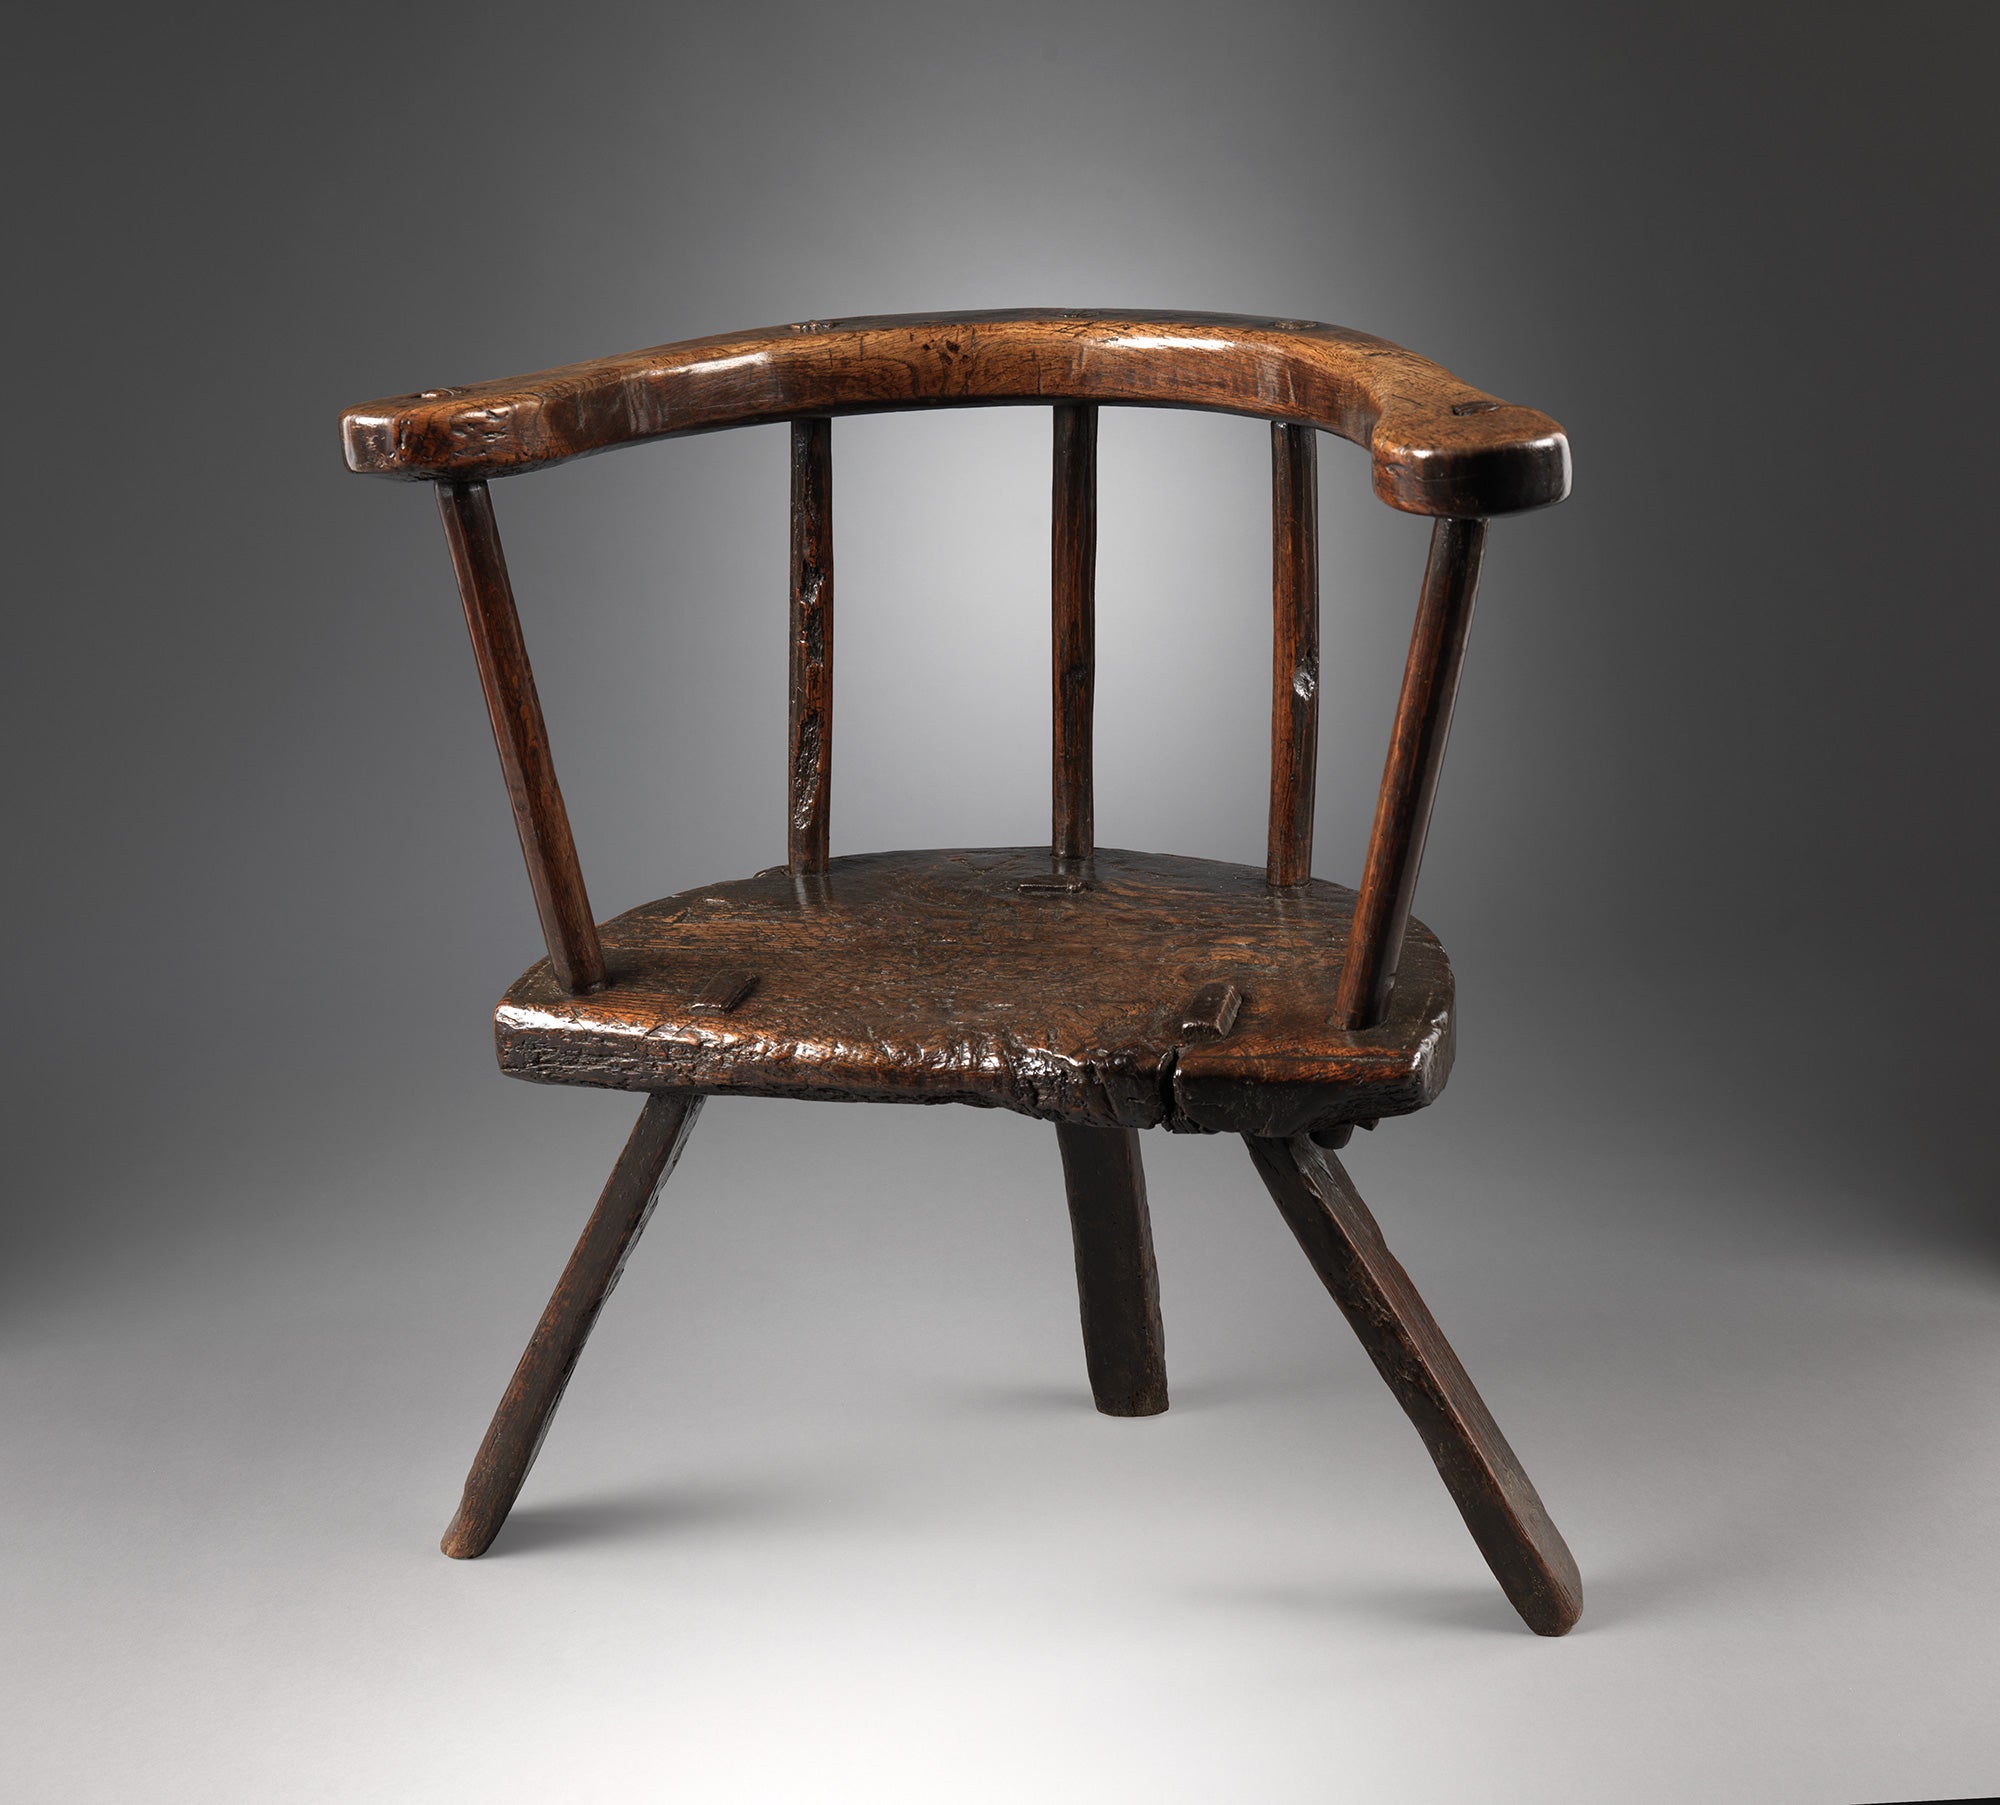 Exceptional Welsh Primitive "Ox-Bow" Armchair